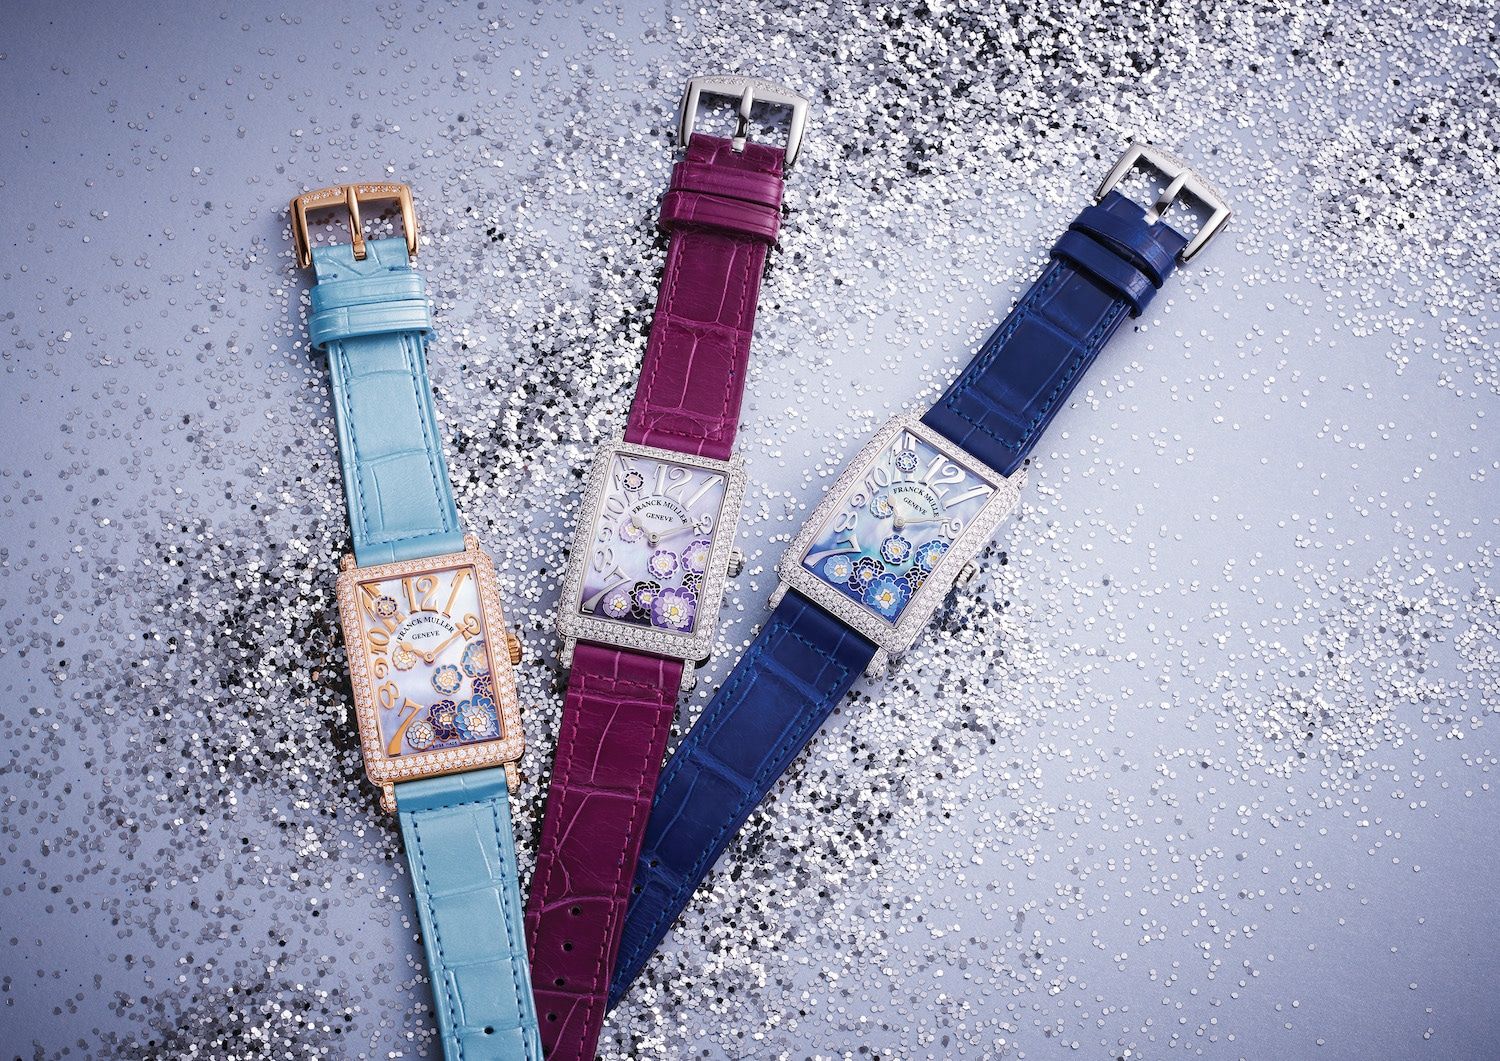 The Franck Muller Long Island Peony adds iridescent glamour to the festive season